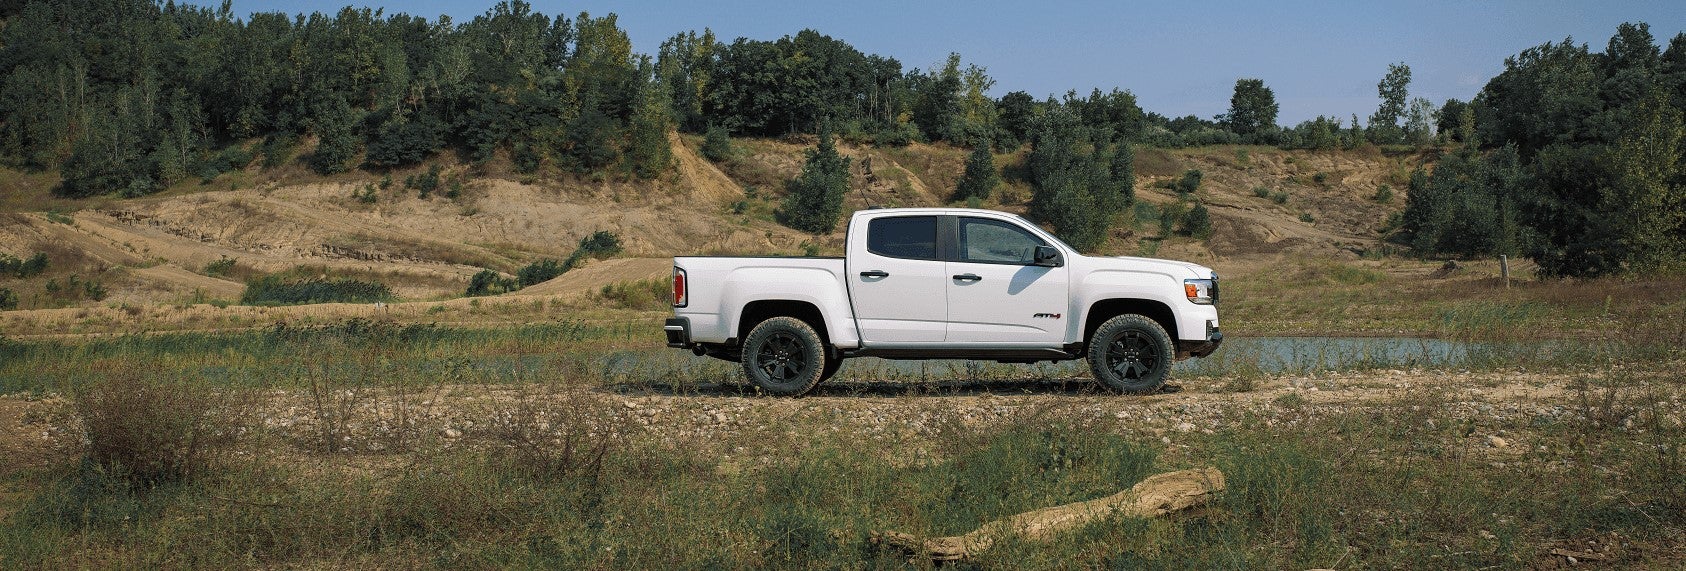 2021 GMC Canyon Review Fishers IN